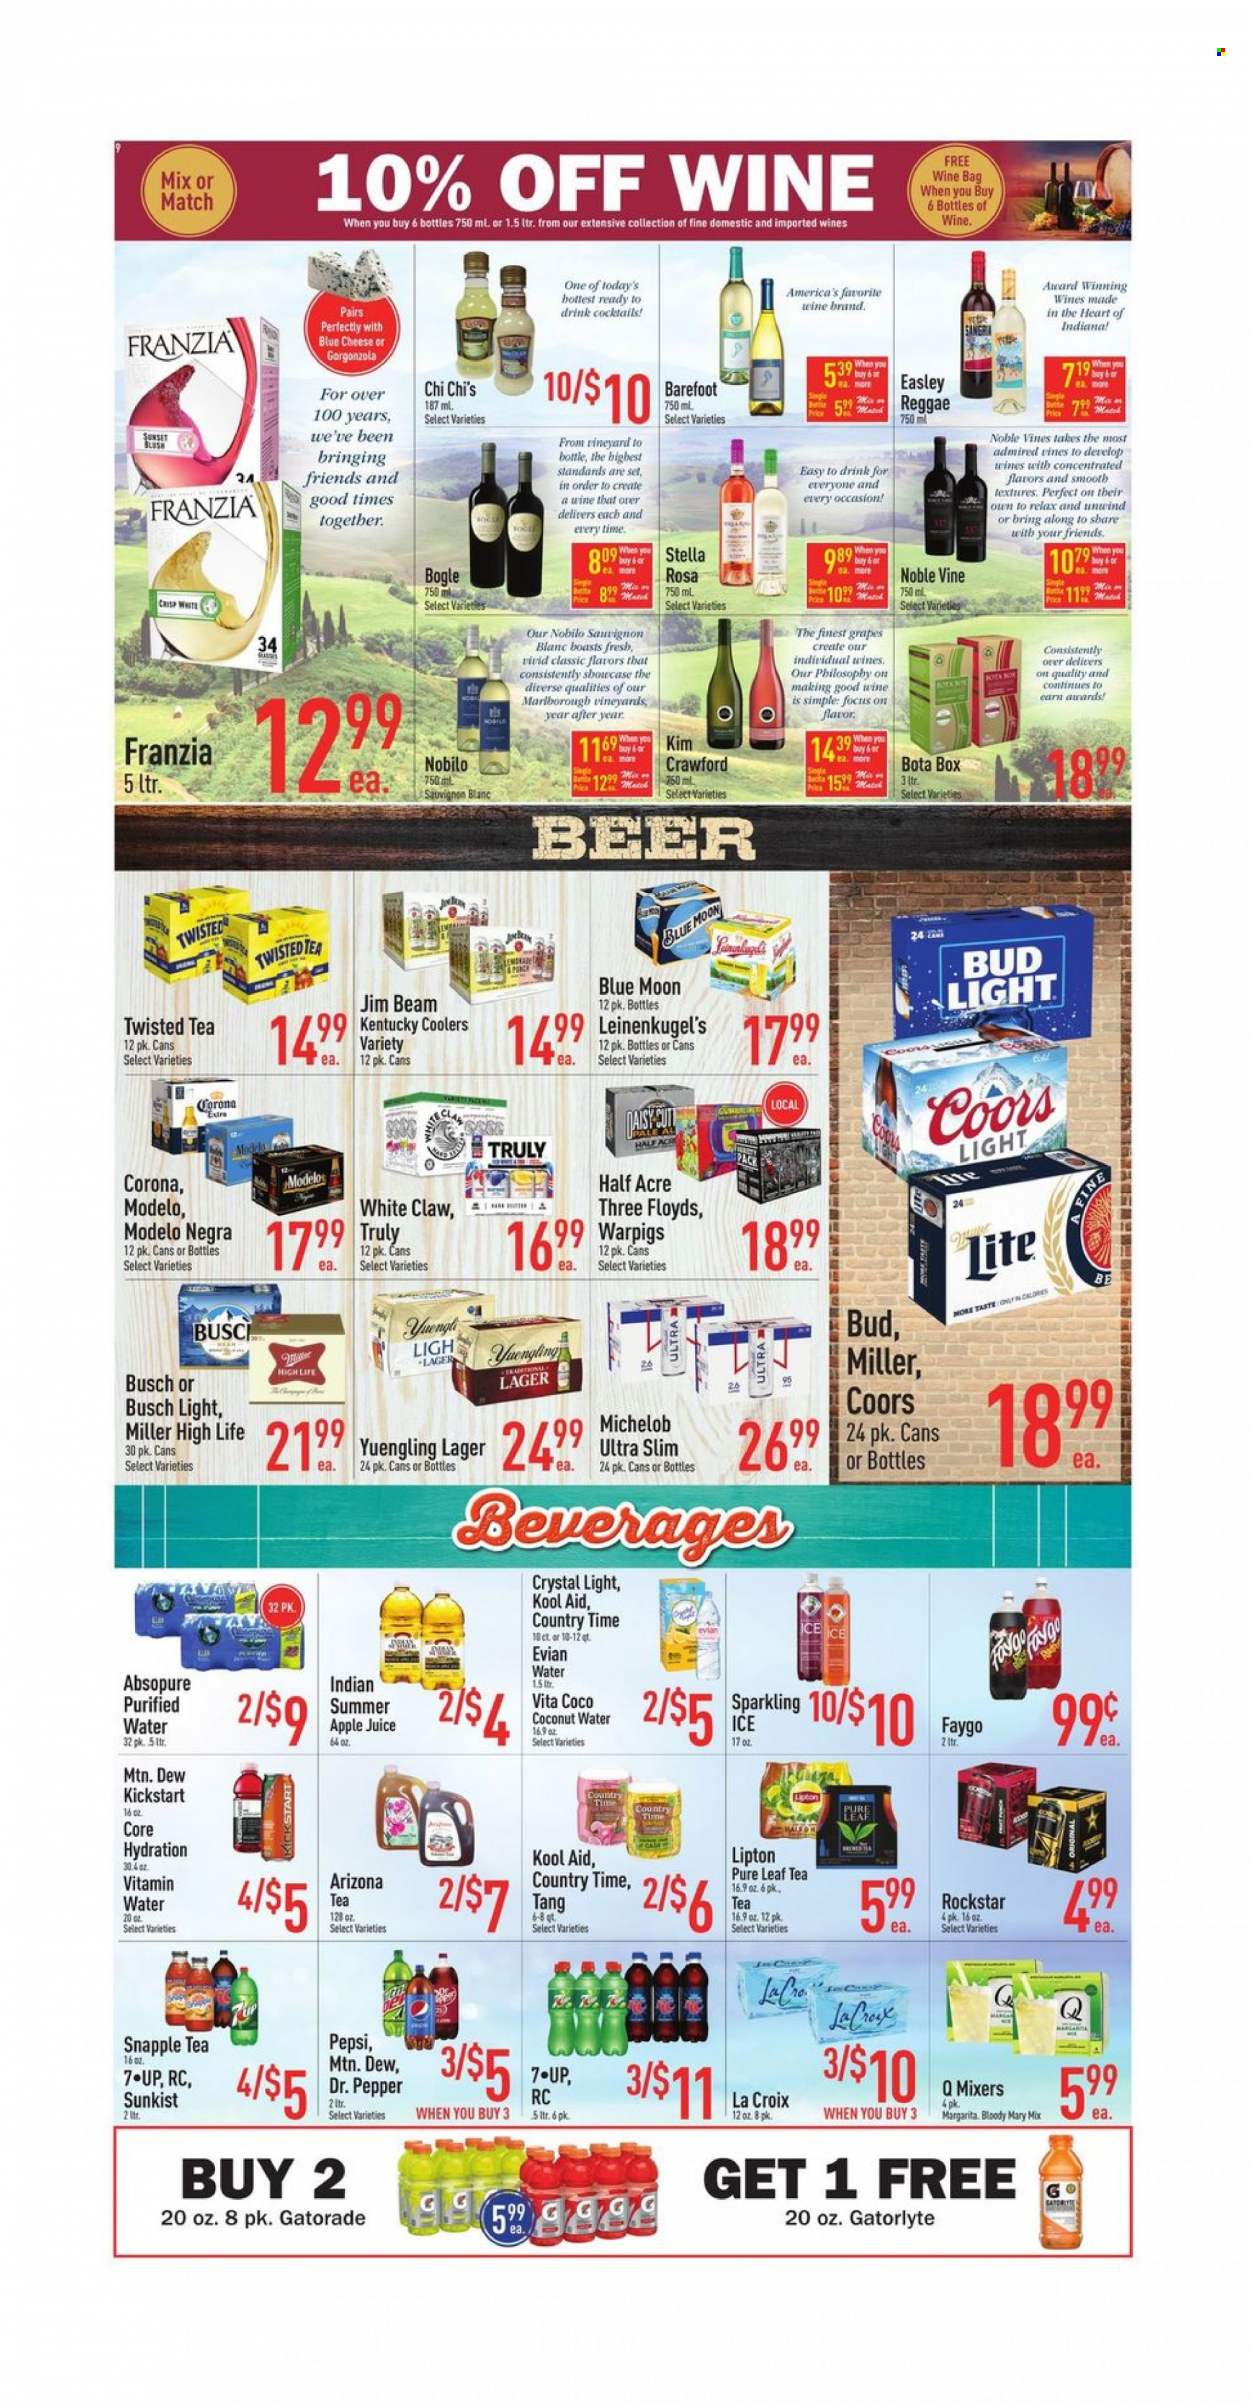 thumbnail - Strack & Van Til Flyer - 05/24/2023 - 05/30/2023 - Sales products - grapes, gorgonzola, pepper, apple juice, lemonade, Mountain Dew, Pepsi, juice, Lipton, ice tea, Dr. Pepper, coconut water, soft drink, AriZona, Snapple, Country Time, Rockstar, Gatorade, sparkling water, purified water, Evian, vitamin water, water, Pure Leaf, white wine, wine, alcohol, Sauvignon Blanc, Bogle, punch, Jim Beam, White Claw, TRULY, beer, Busch, Bud Light, Corona Extra, Miller, Lager, Modelo, electrolyte drink, Leinenkugel's, Coors, Blue Moon, Twisted Tea, Yuengling, Michelob. Page 9.